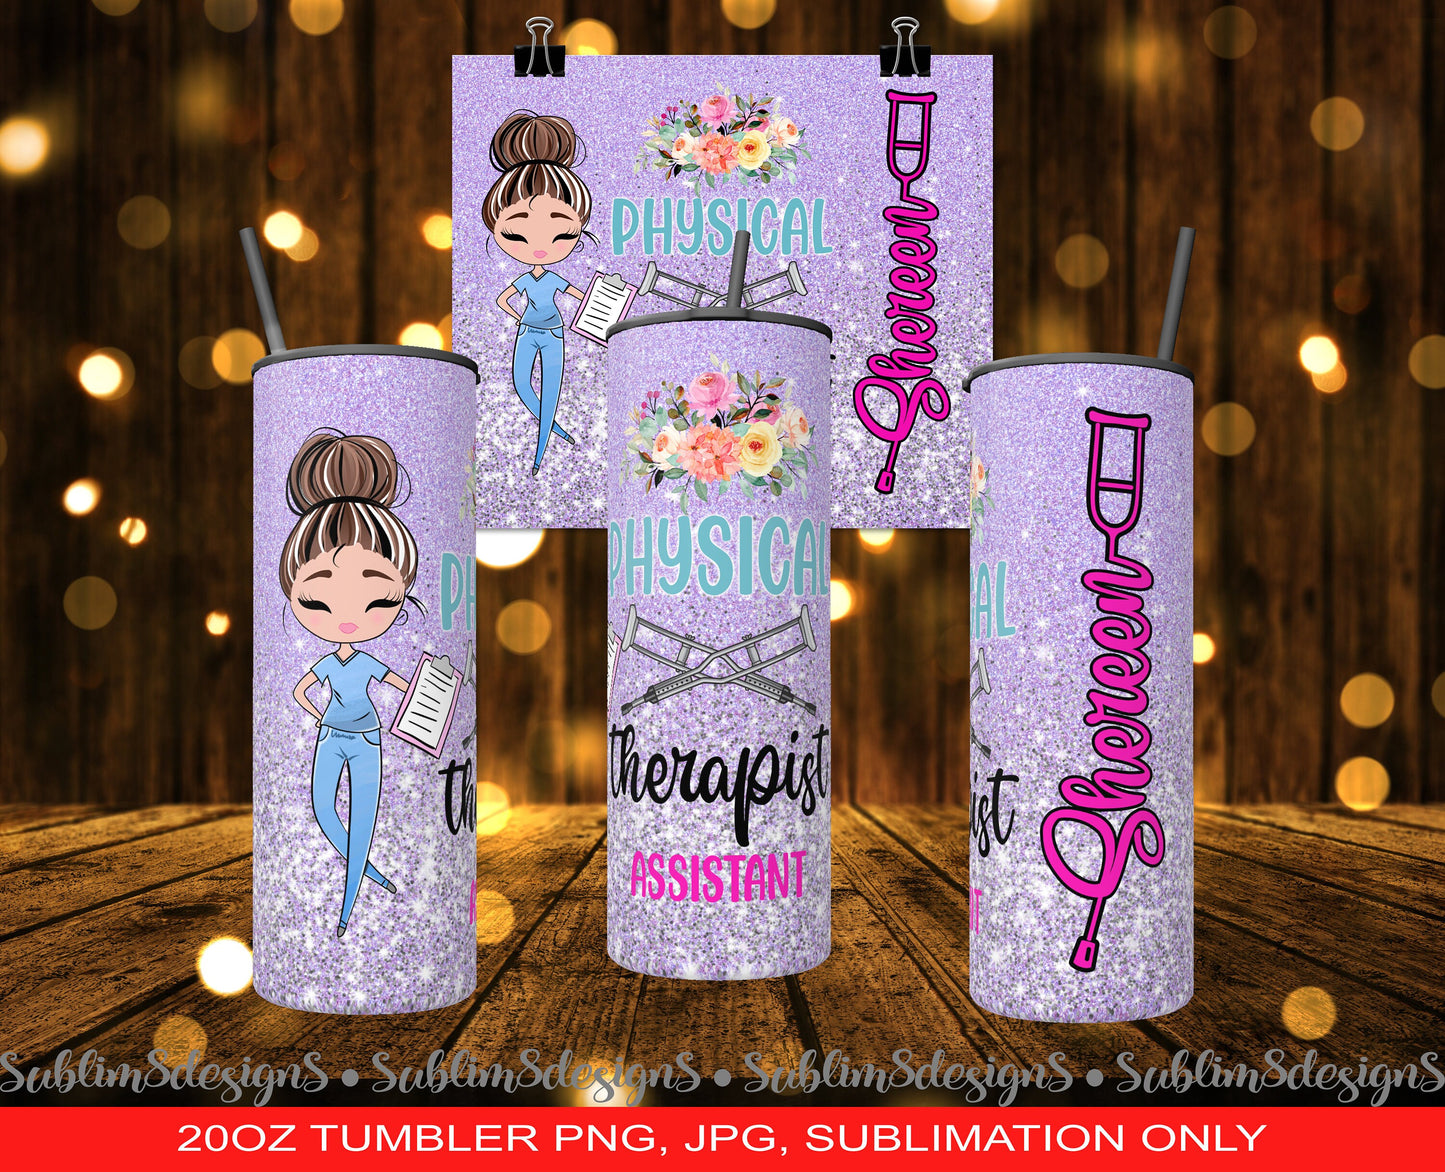 Personalized  Physical Therapist Assistant  20oz Tumbler PNG and JPG ONLY